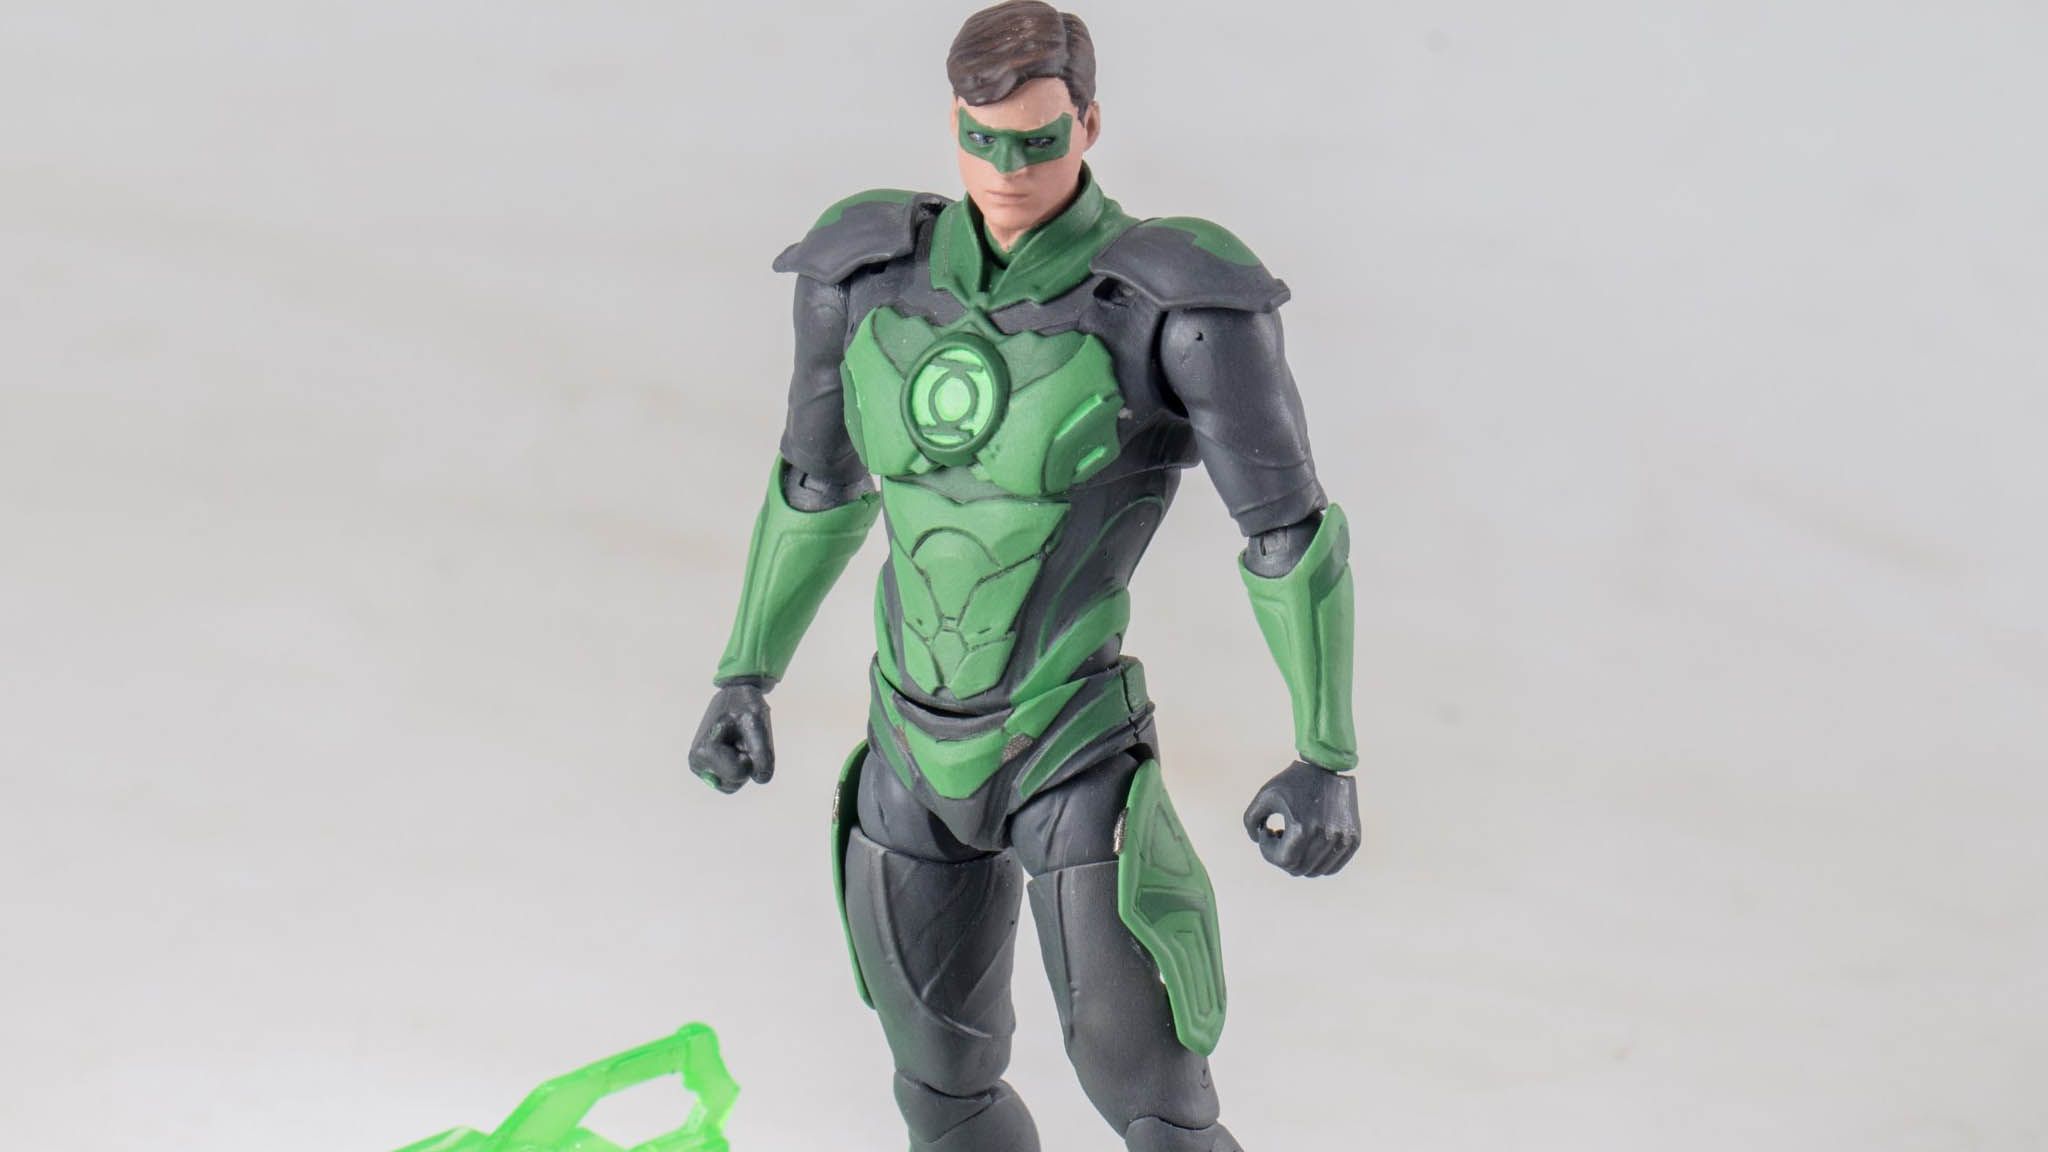 Hiya Toys shows off new image of Injustice 2 Green Lantern figure